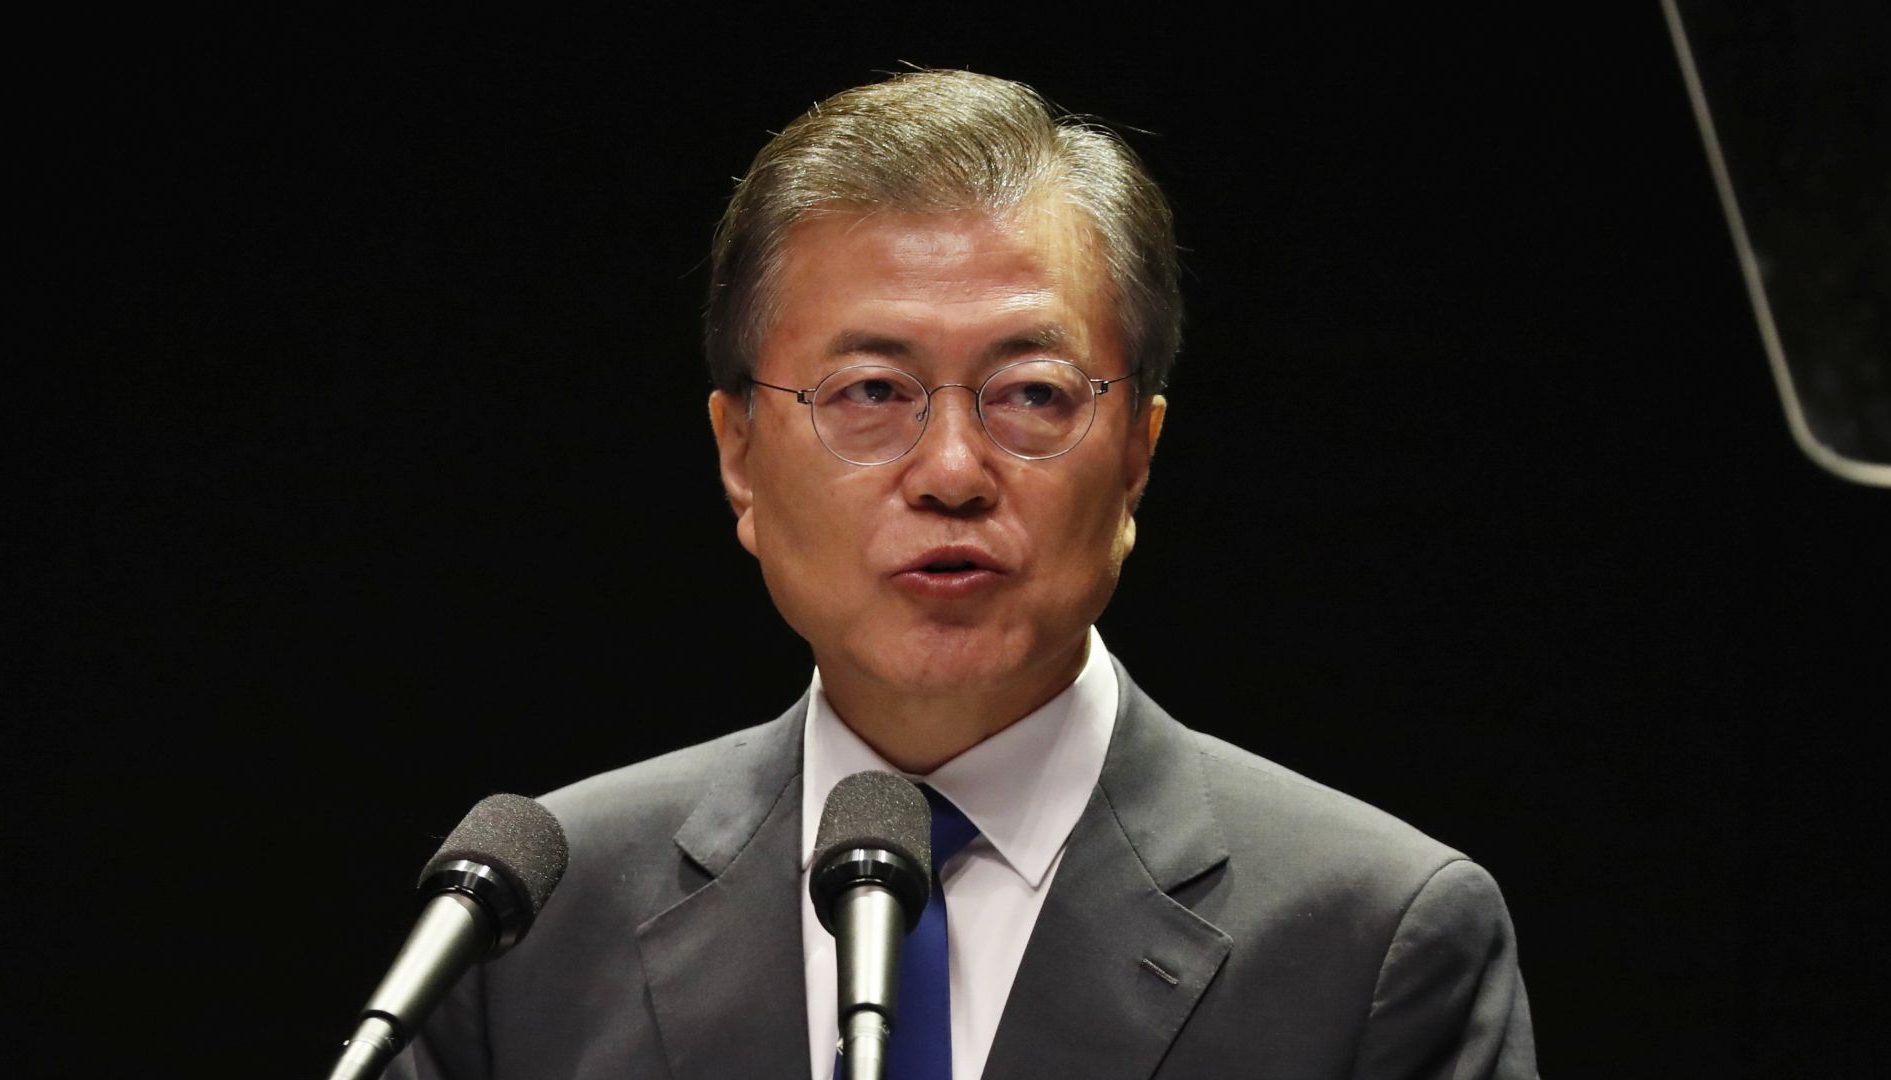 epa06144952 South Korean President Moon Jae-In delivers a speech during a ceremony marking the 72th anniversary of Korea's independence from Japanese colonial rule in 1945 in Seoul, South Korea, 15 August 2017.  EPA/JEON HEON-KYUN / POOL